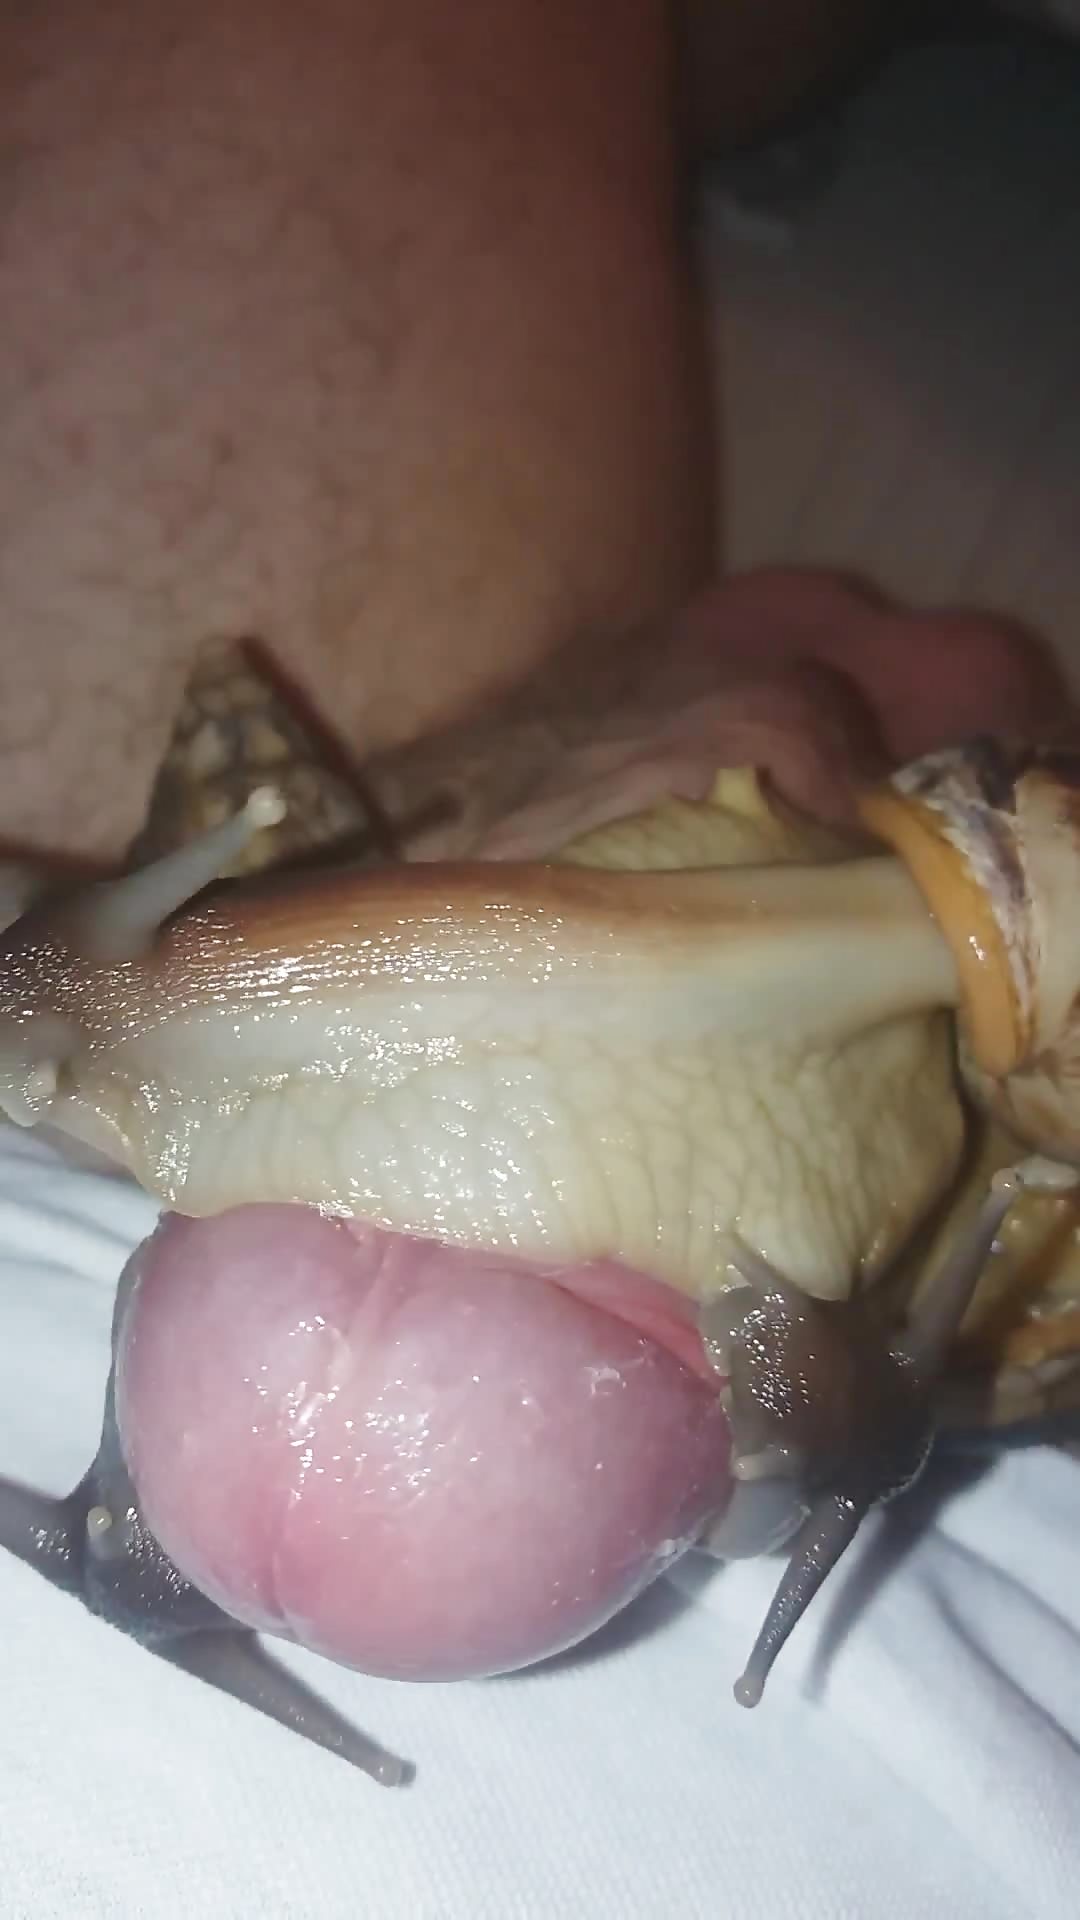 Snail crawling on the man's dick increase his orgasm